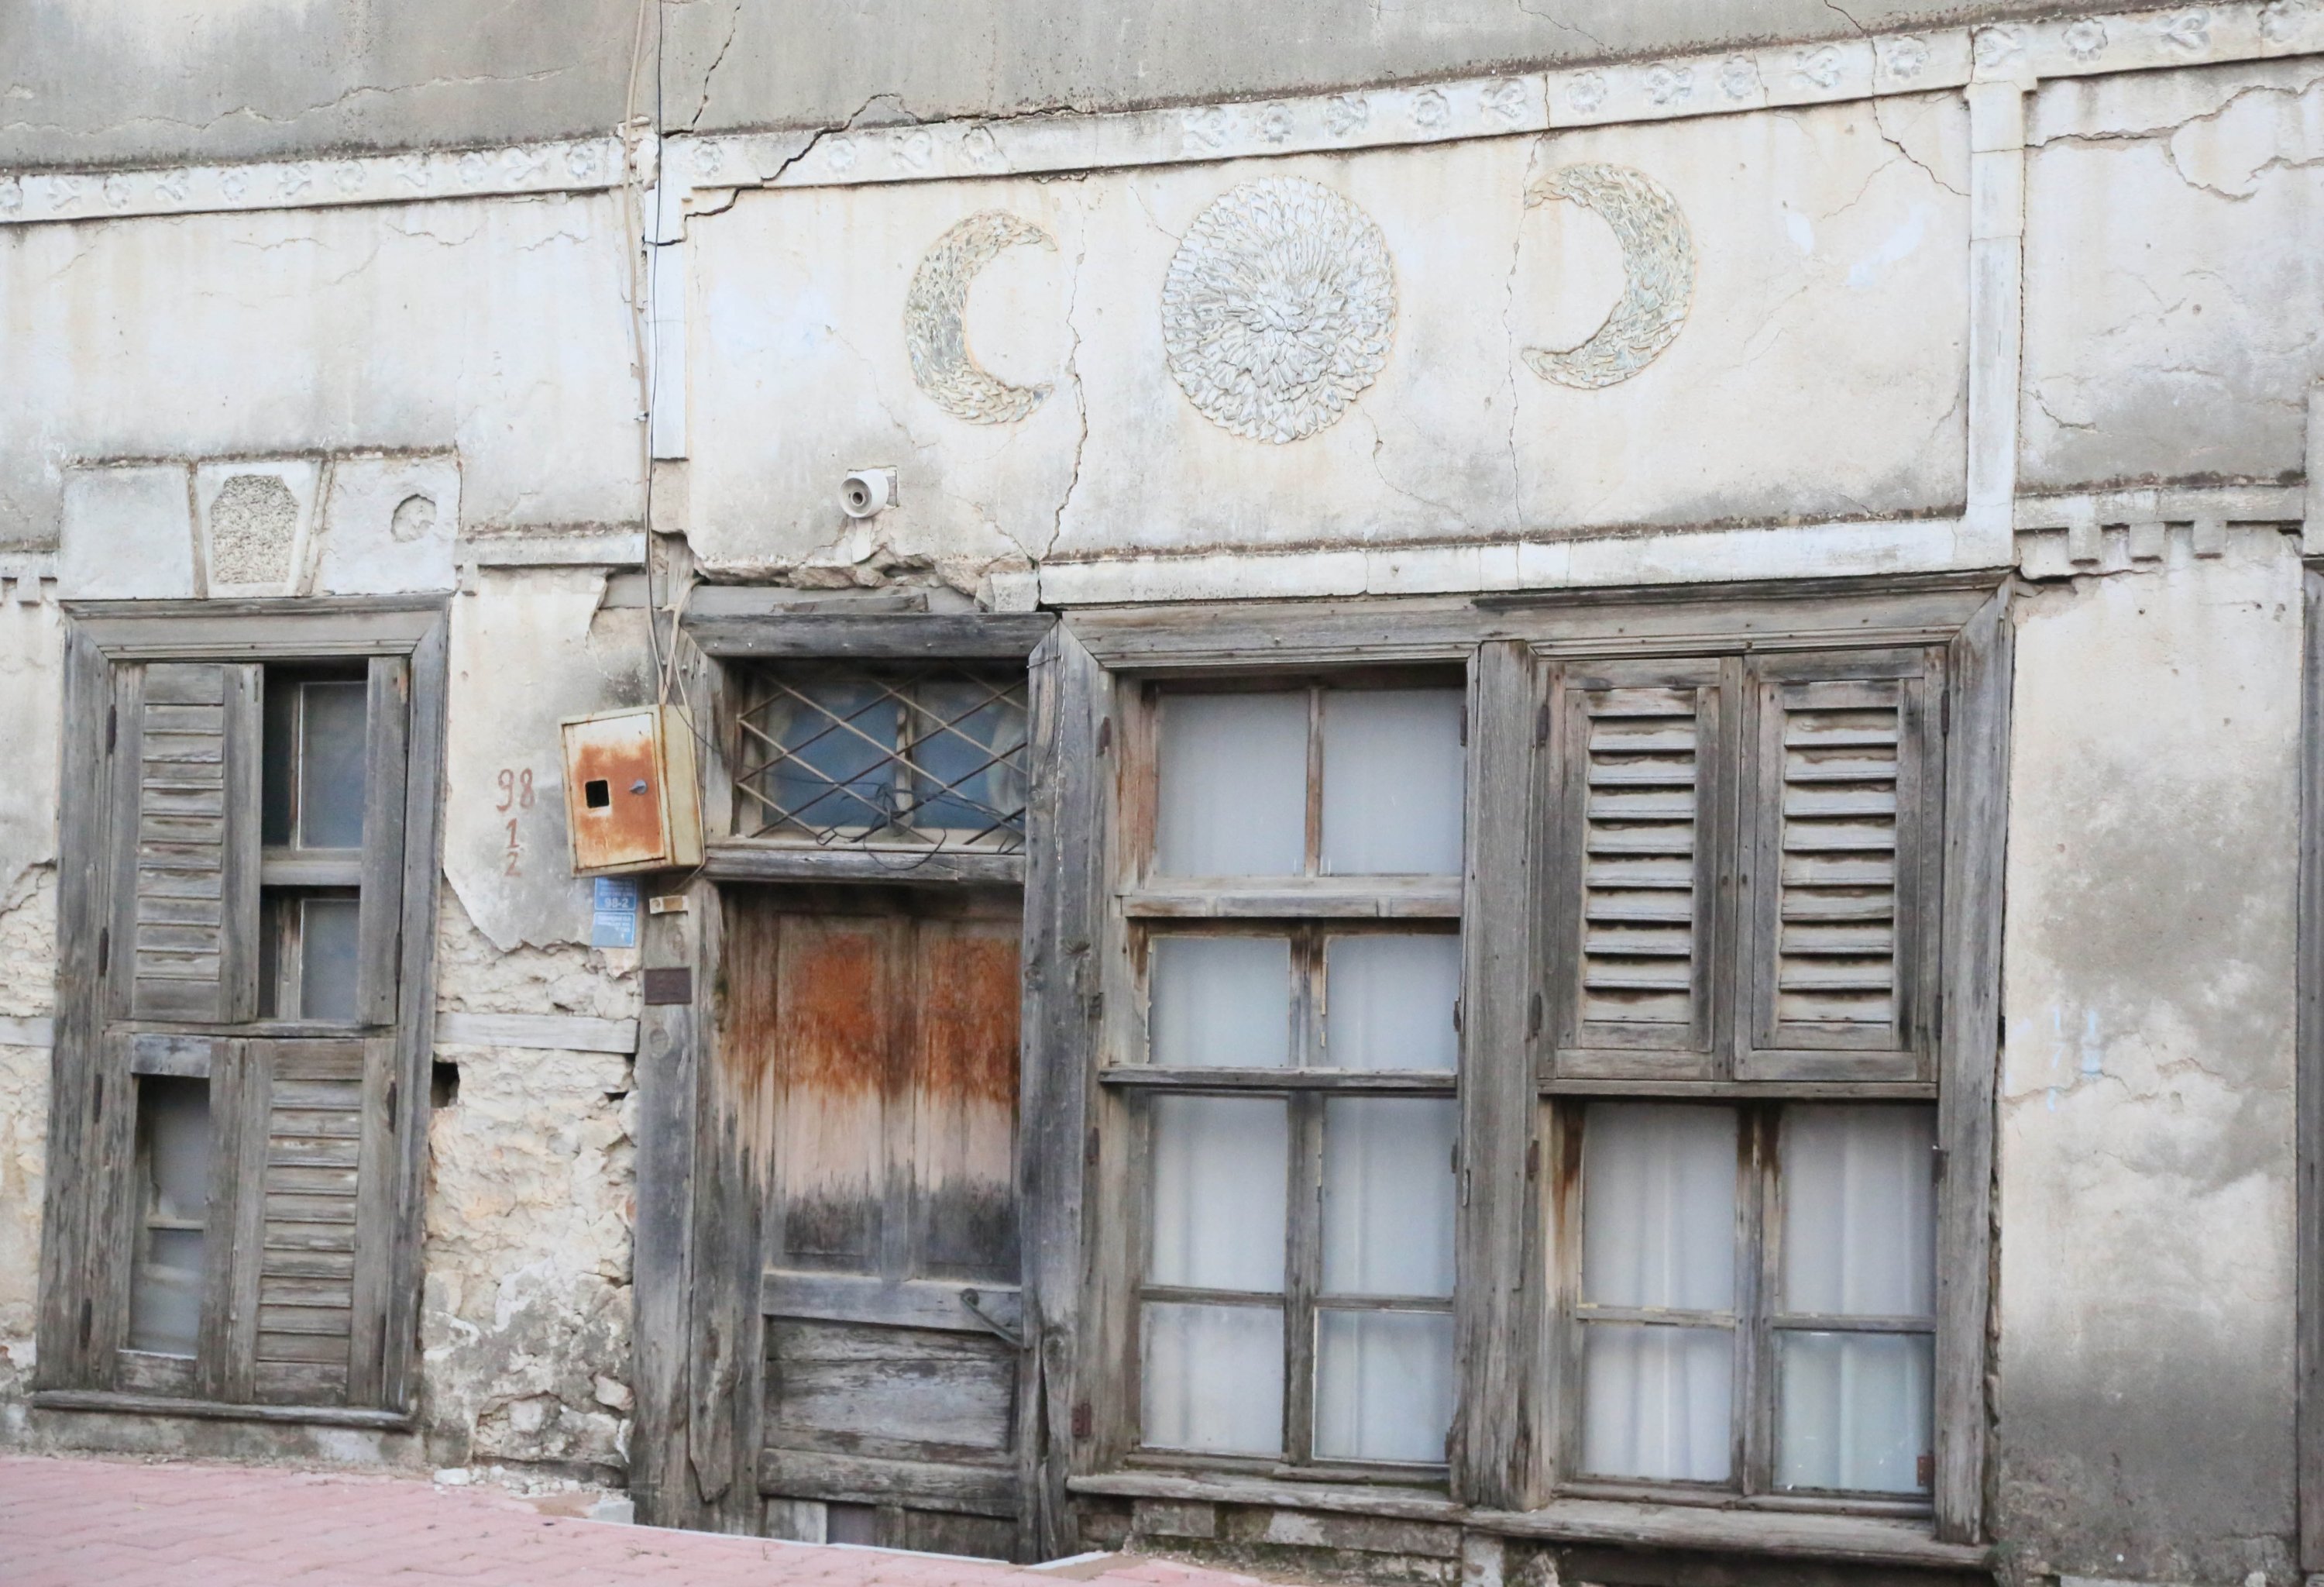 The historical building revealed a notebook on trade records from the 1800s, Antalya, Türkiye, Dec. 13, 2022. (DHA Photo)